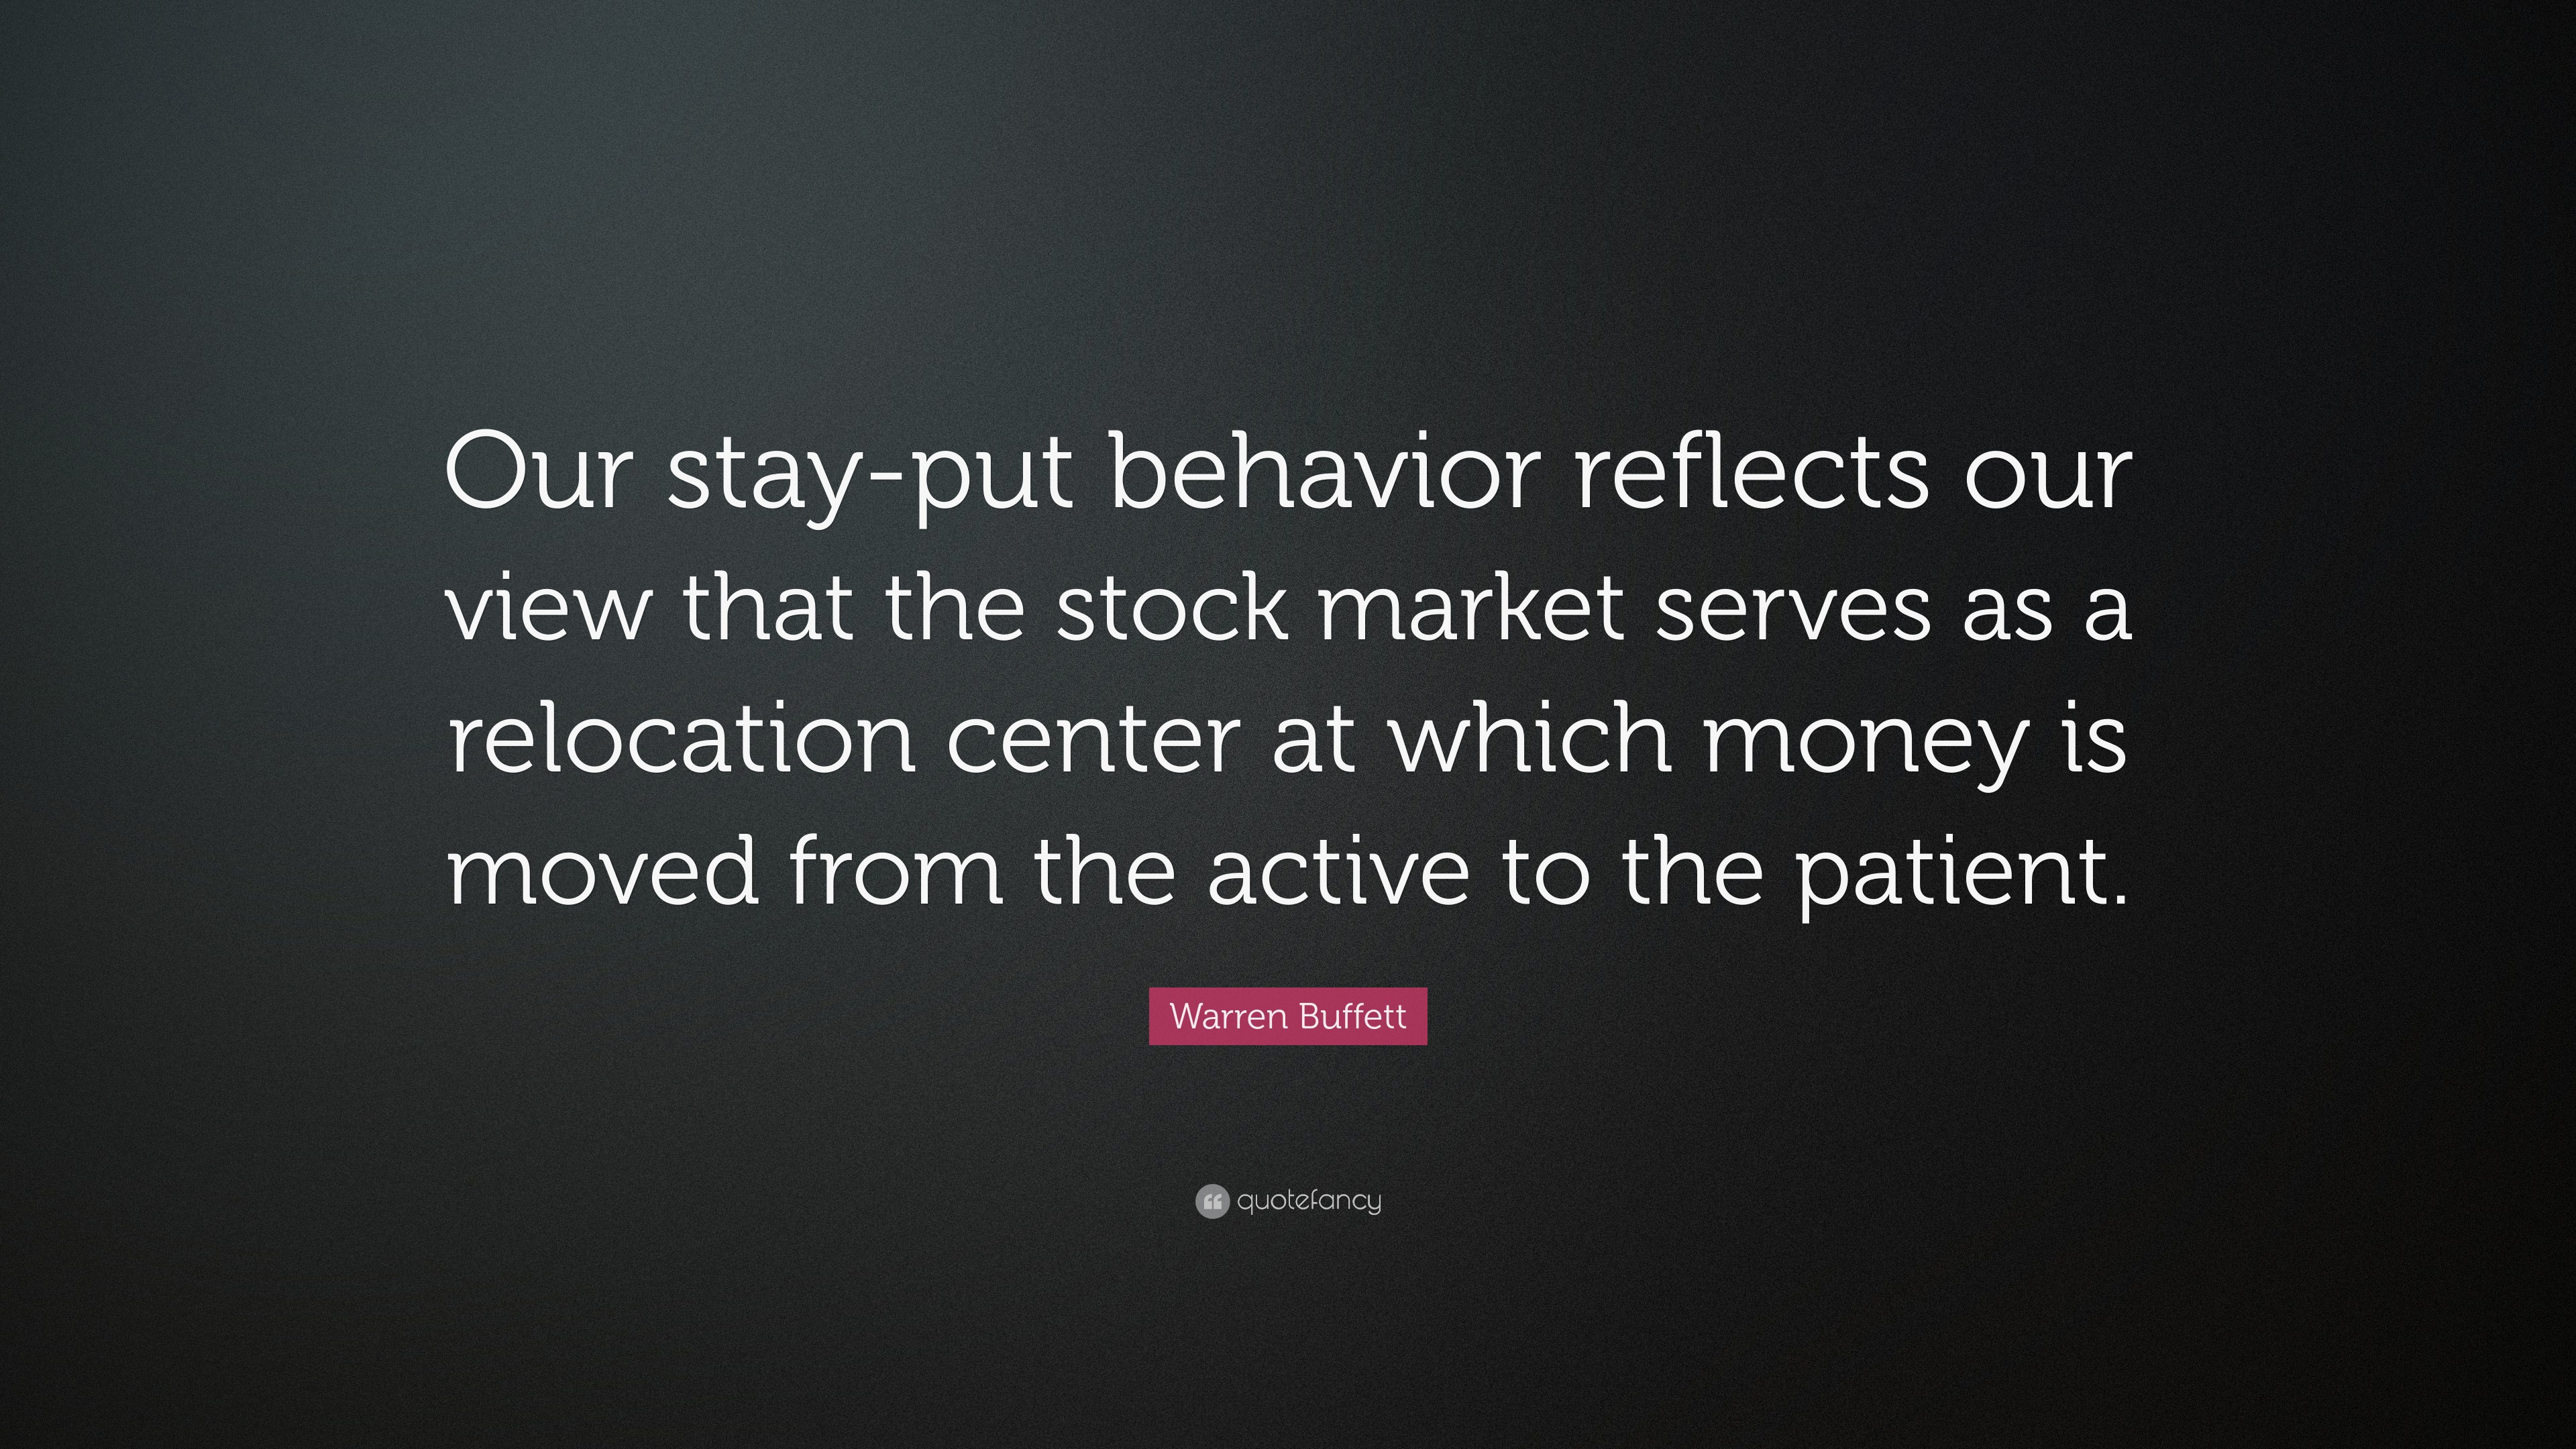 Warren Buffett Quote: “Our stay-put behavior reflects our view that the  stock market serves as a relocation center at which money is moved from”